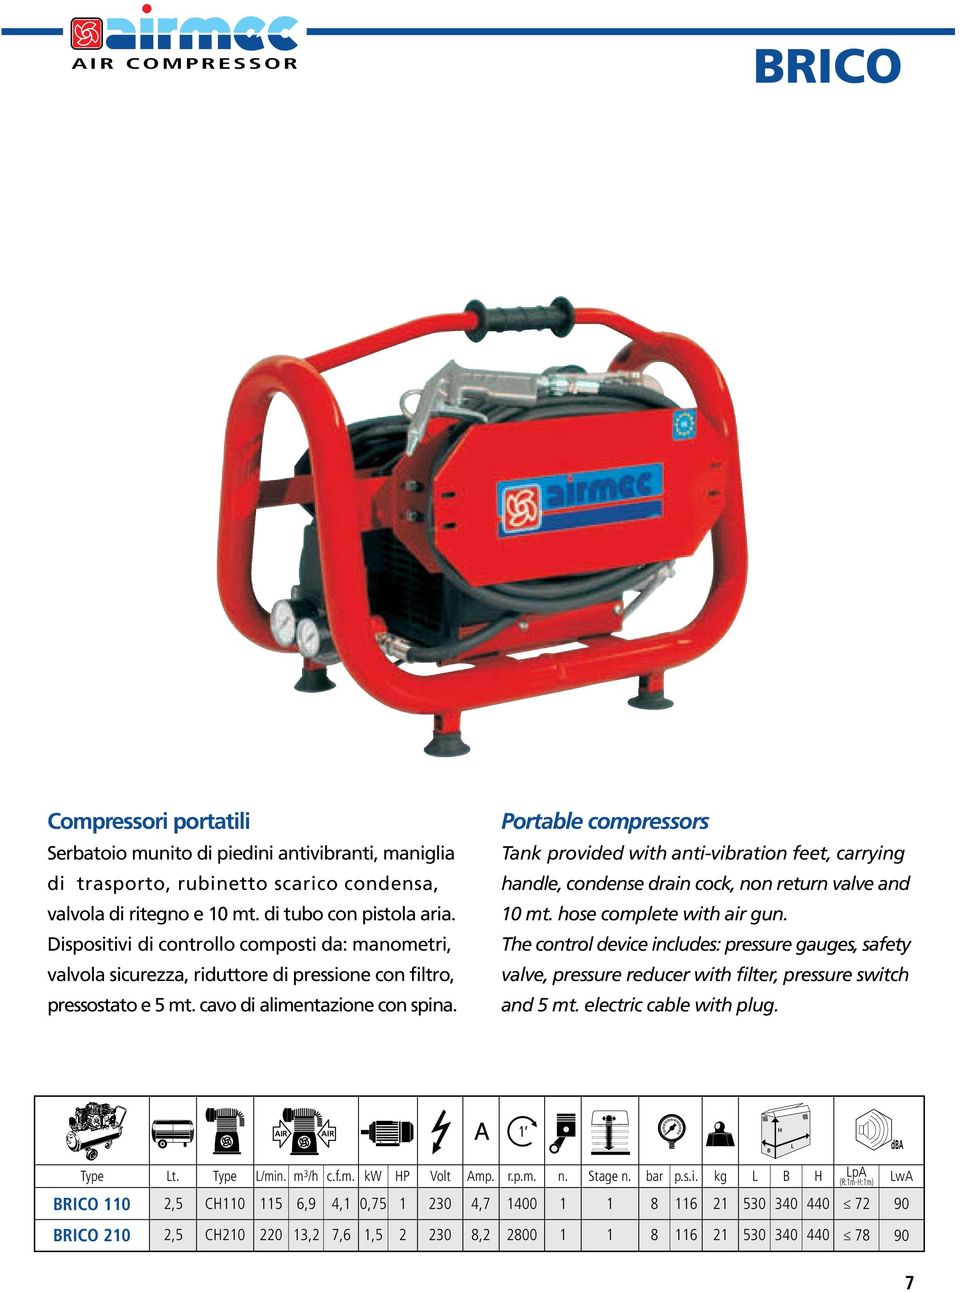 Portable compressors Tank provided with anti-vibration feet, carrying handle, condense drain cock, non return valve and 10 mt. hose complete with air gun.